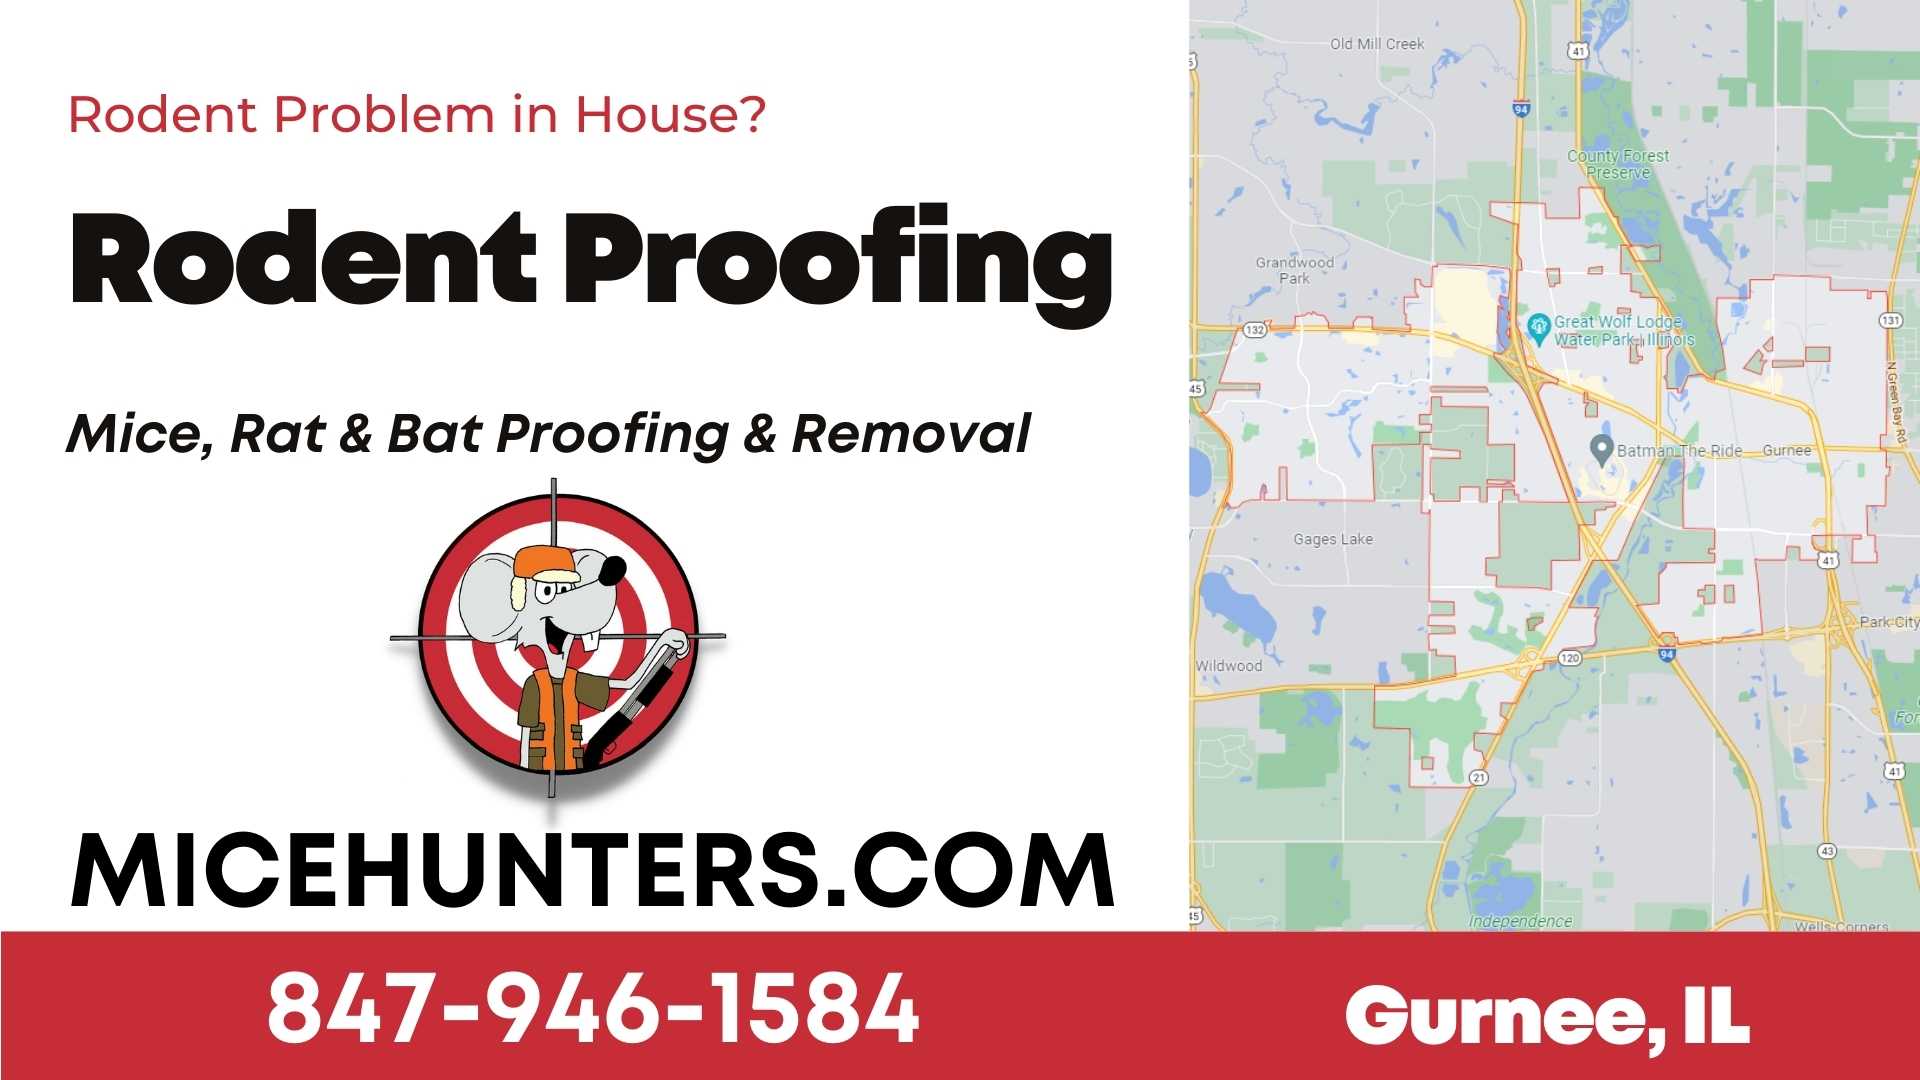 Gurnee Rodent and Mice Proofing Exterminator near me